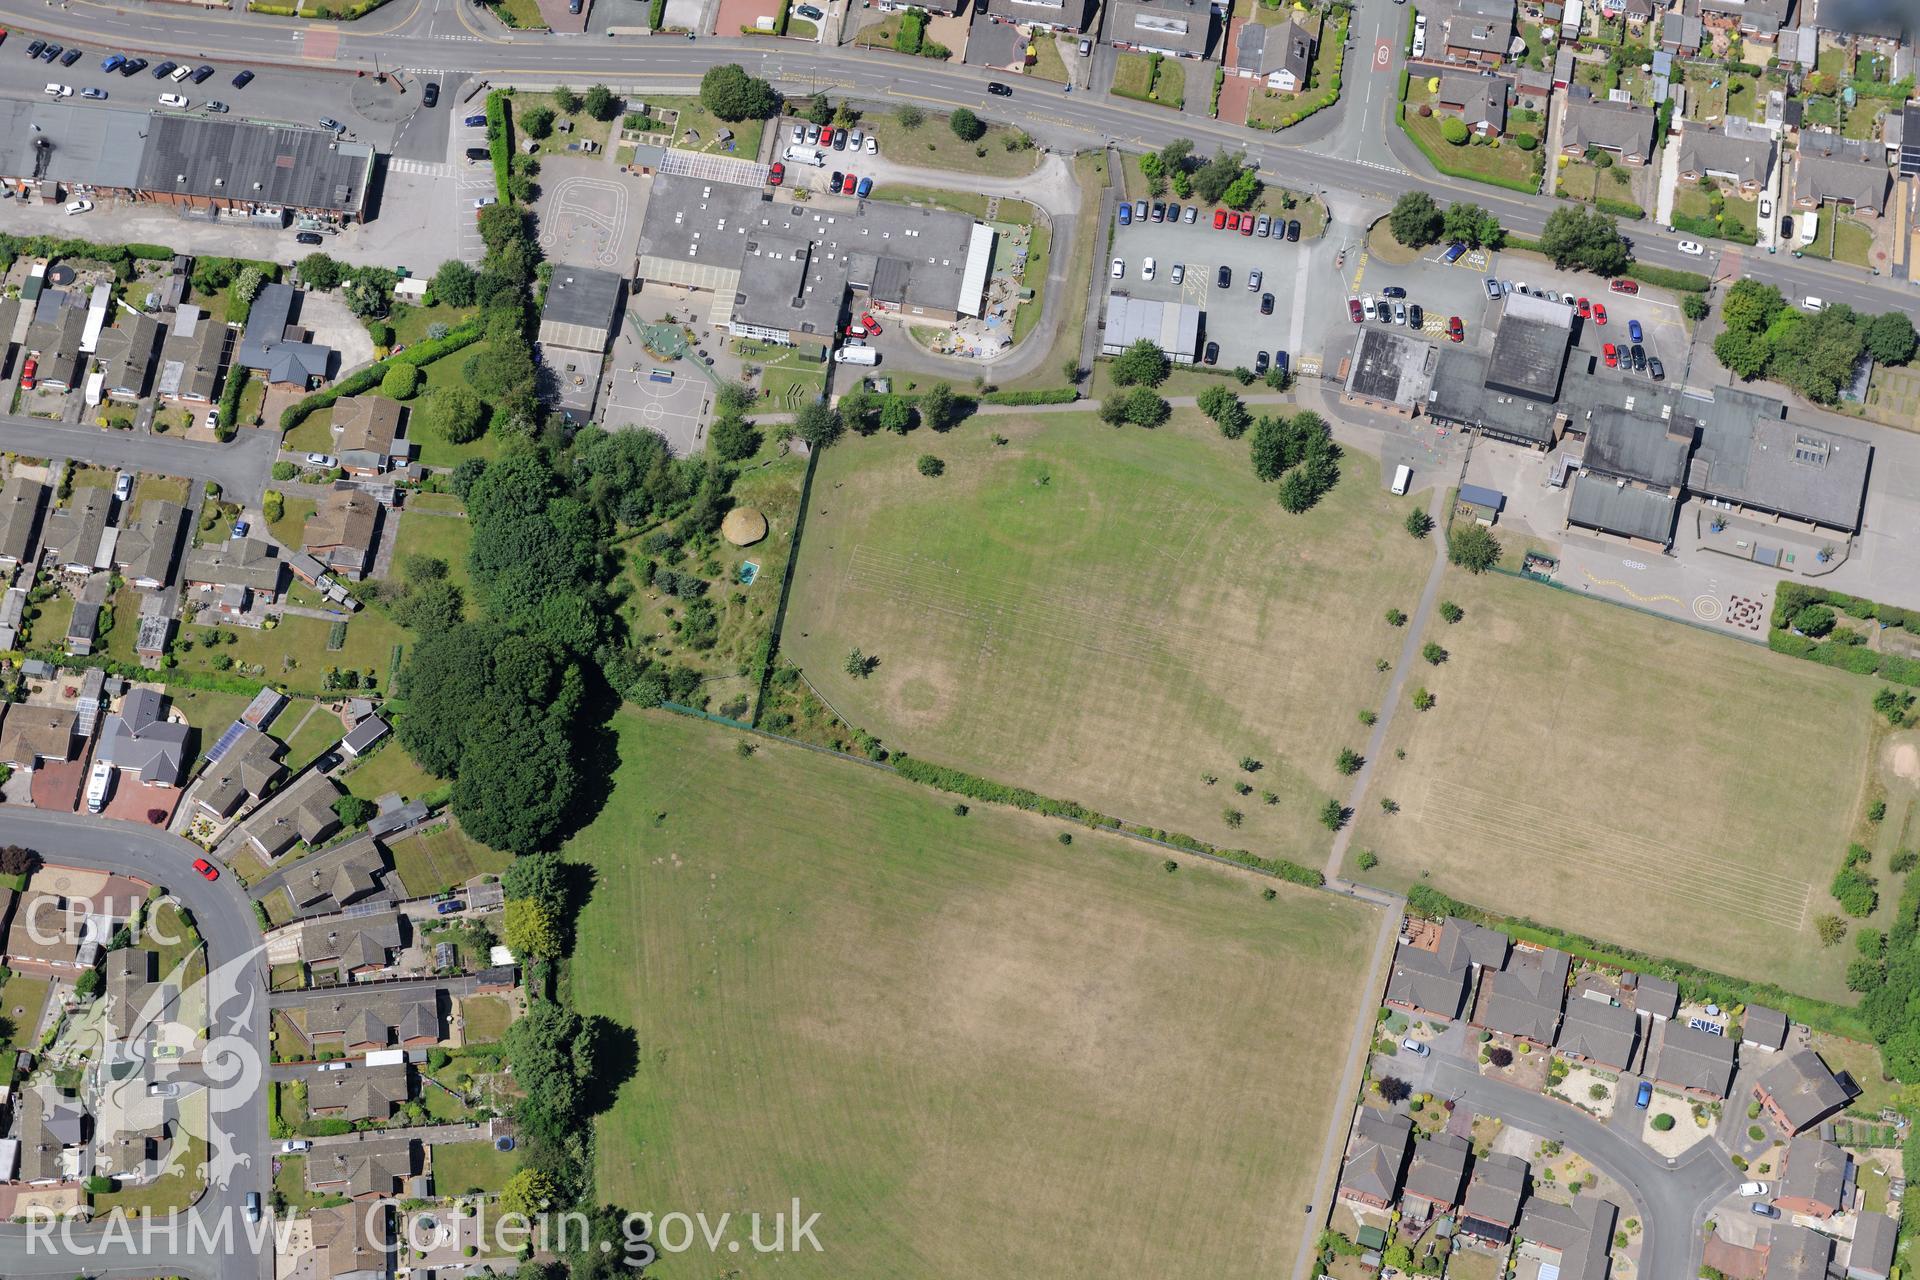 Borras Park community primary school, Wrexham. Oblique aerial photograph taken during the Royal Commission's programme of archaeological aerial reconnaissance by Toby Driver on 30th June 2015.